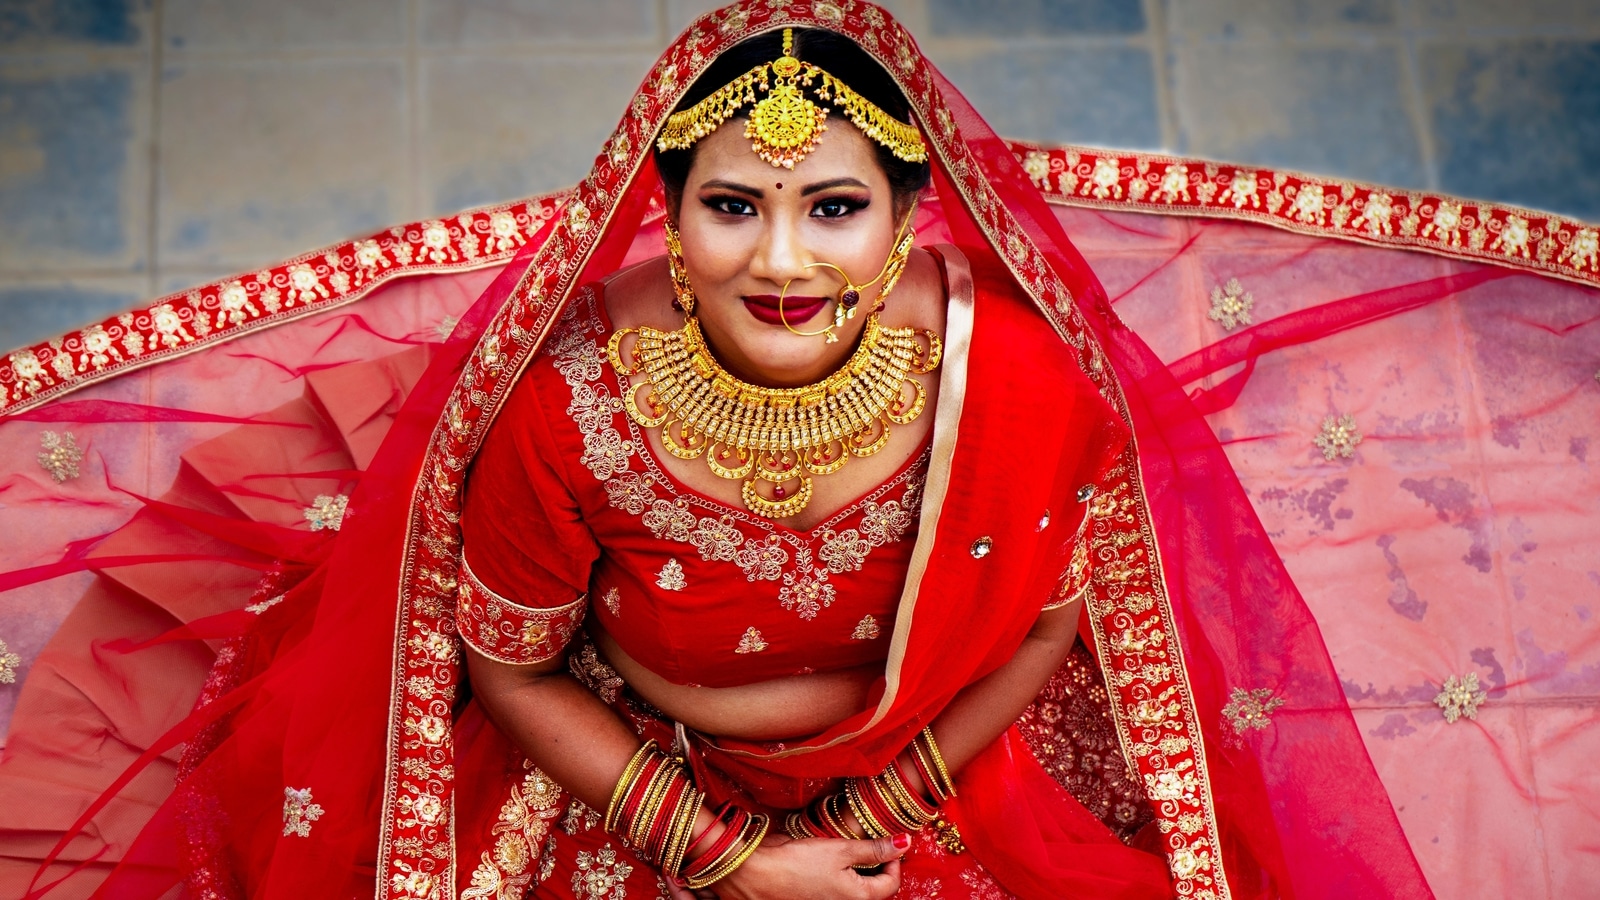 Design an original red wedding lehenga for 5 ft 1 inch bengali girl whose  figure is midsize. make the design very bengali traditional on Craiyon